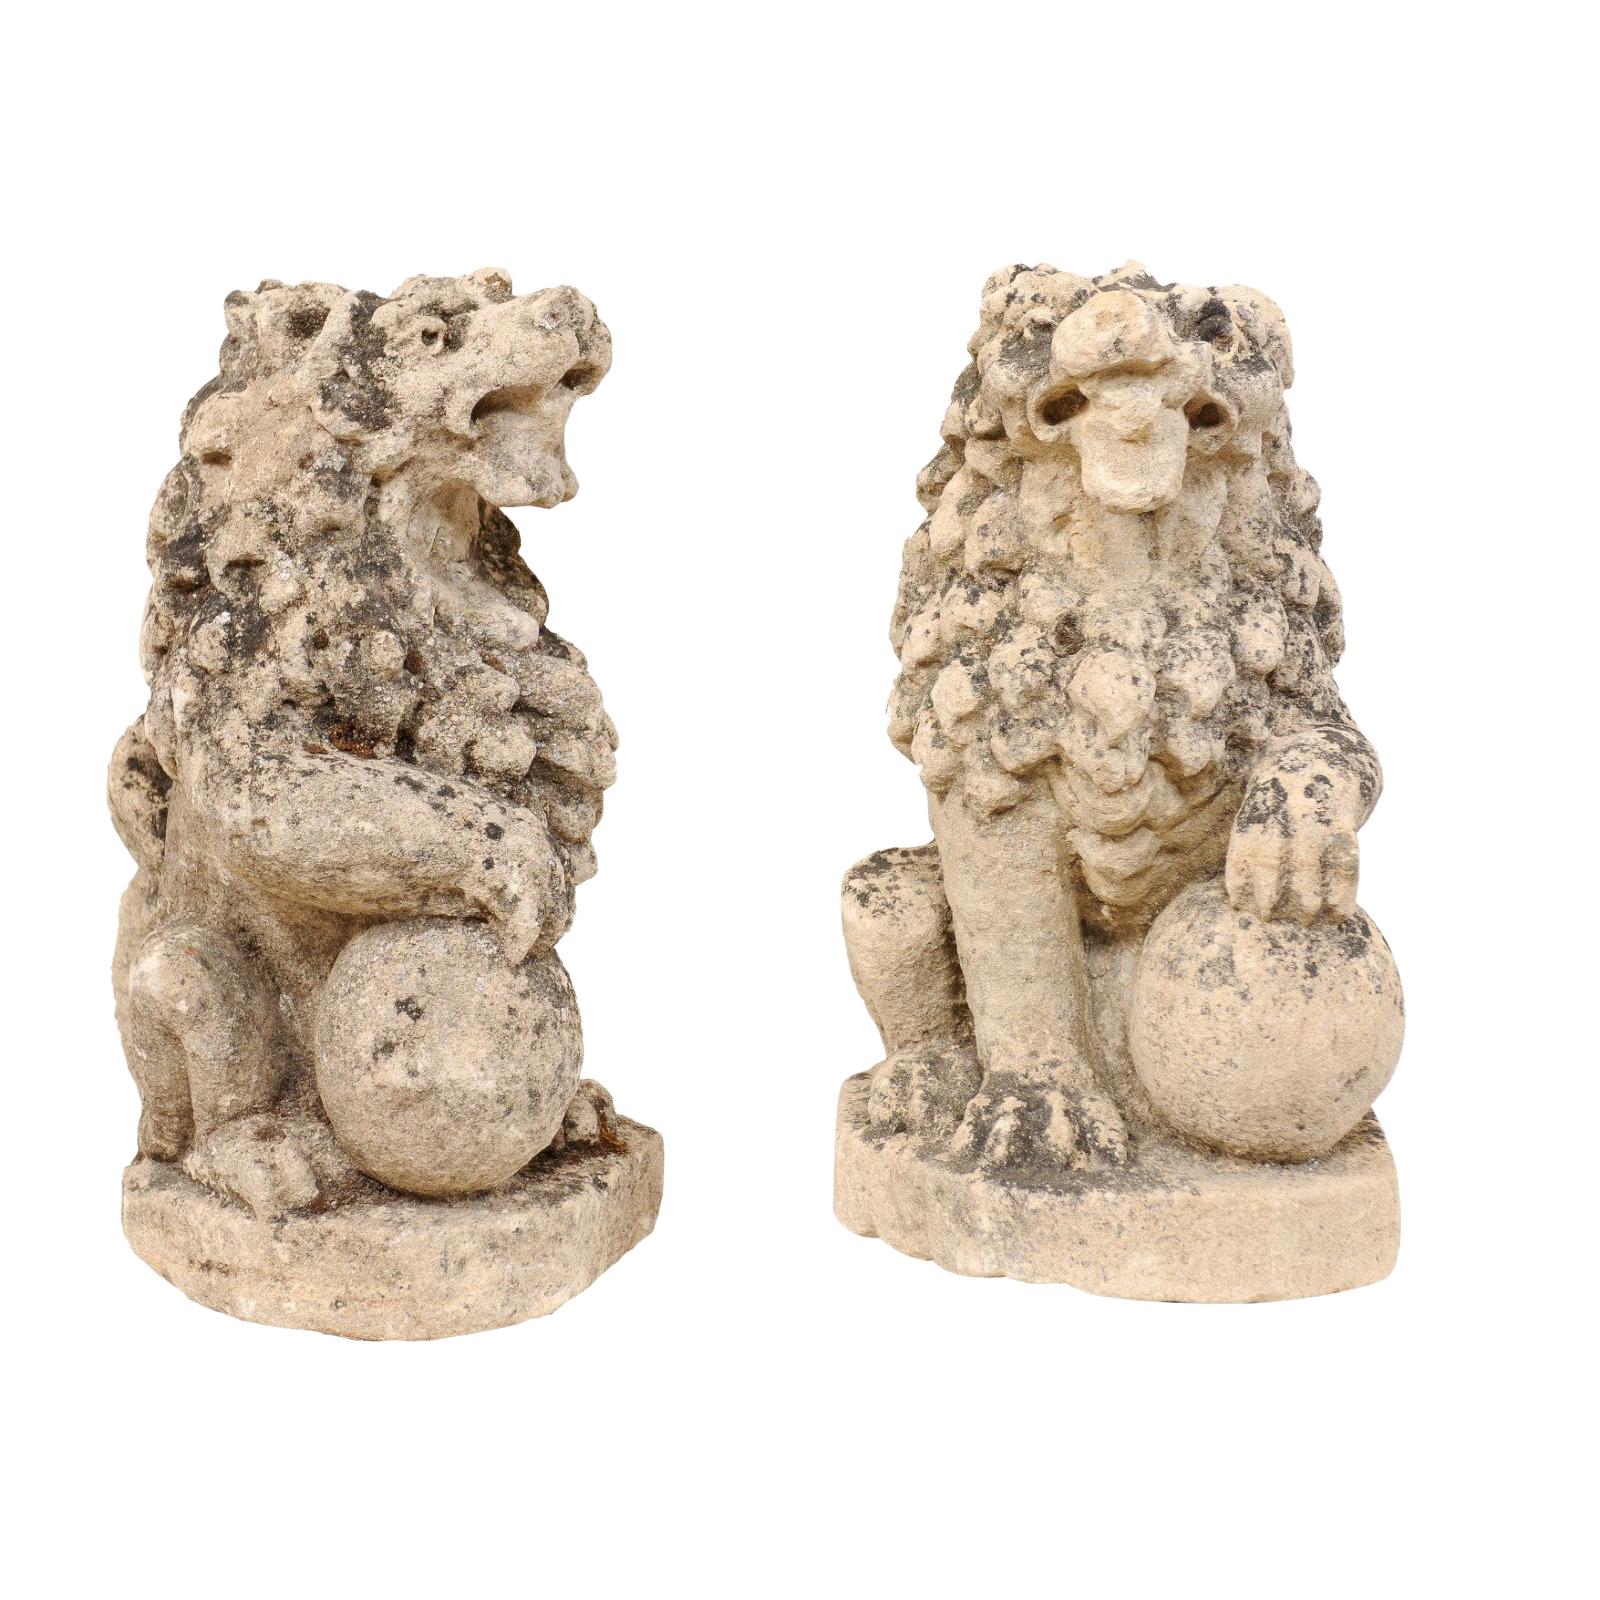 Pair of 19th Century English Lions of Carved Limestone